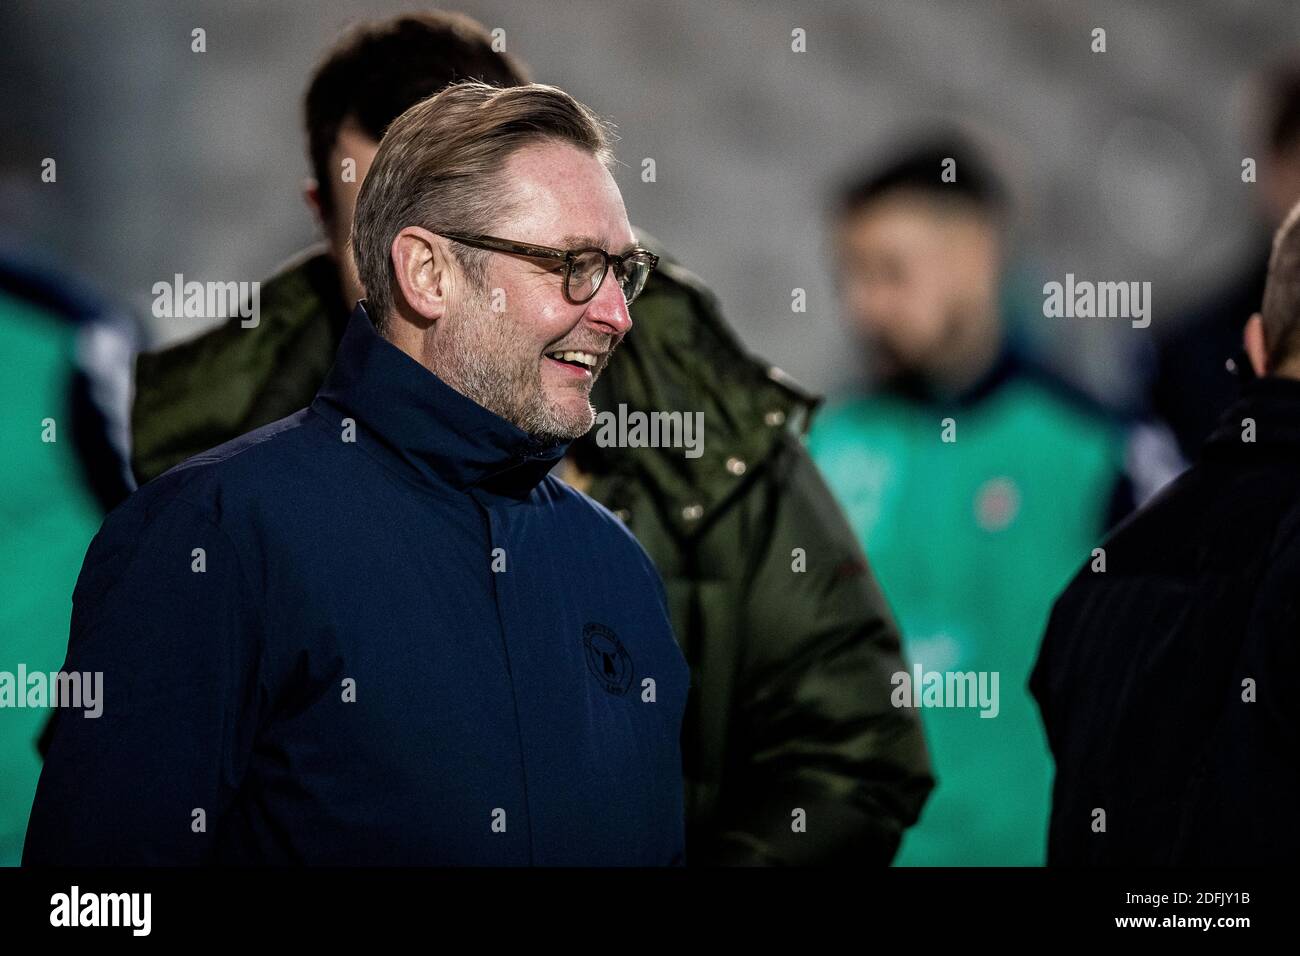 Vejle, Denmark. 05th Dec, 2020. Director Claus Steinlein of FC Midtjylland  seen during the 3F Superliga match between Vejle Boldklub and FC  Midtjylland at Vejle Stadion in Vejle. (Photo Credit: Gonzales Photo/Alamy